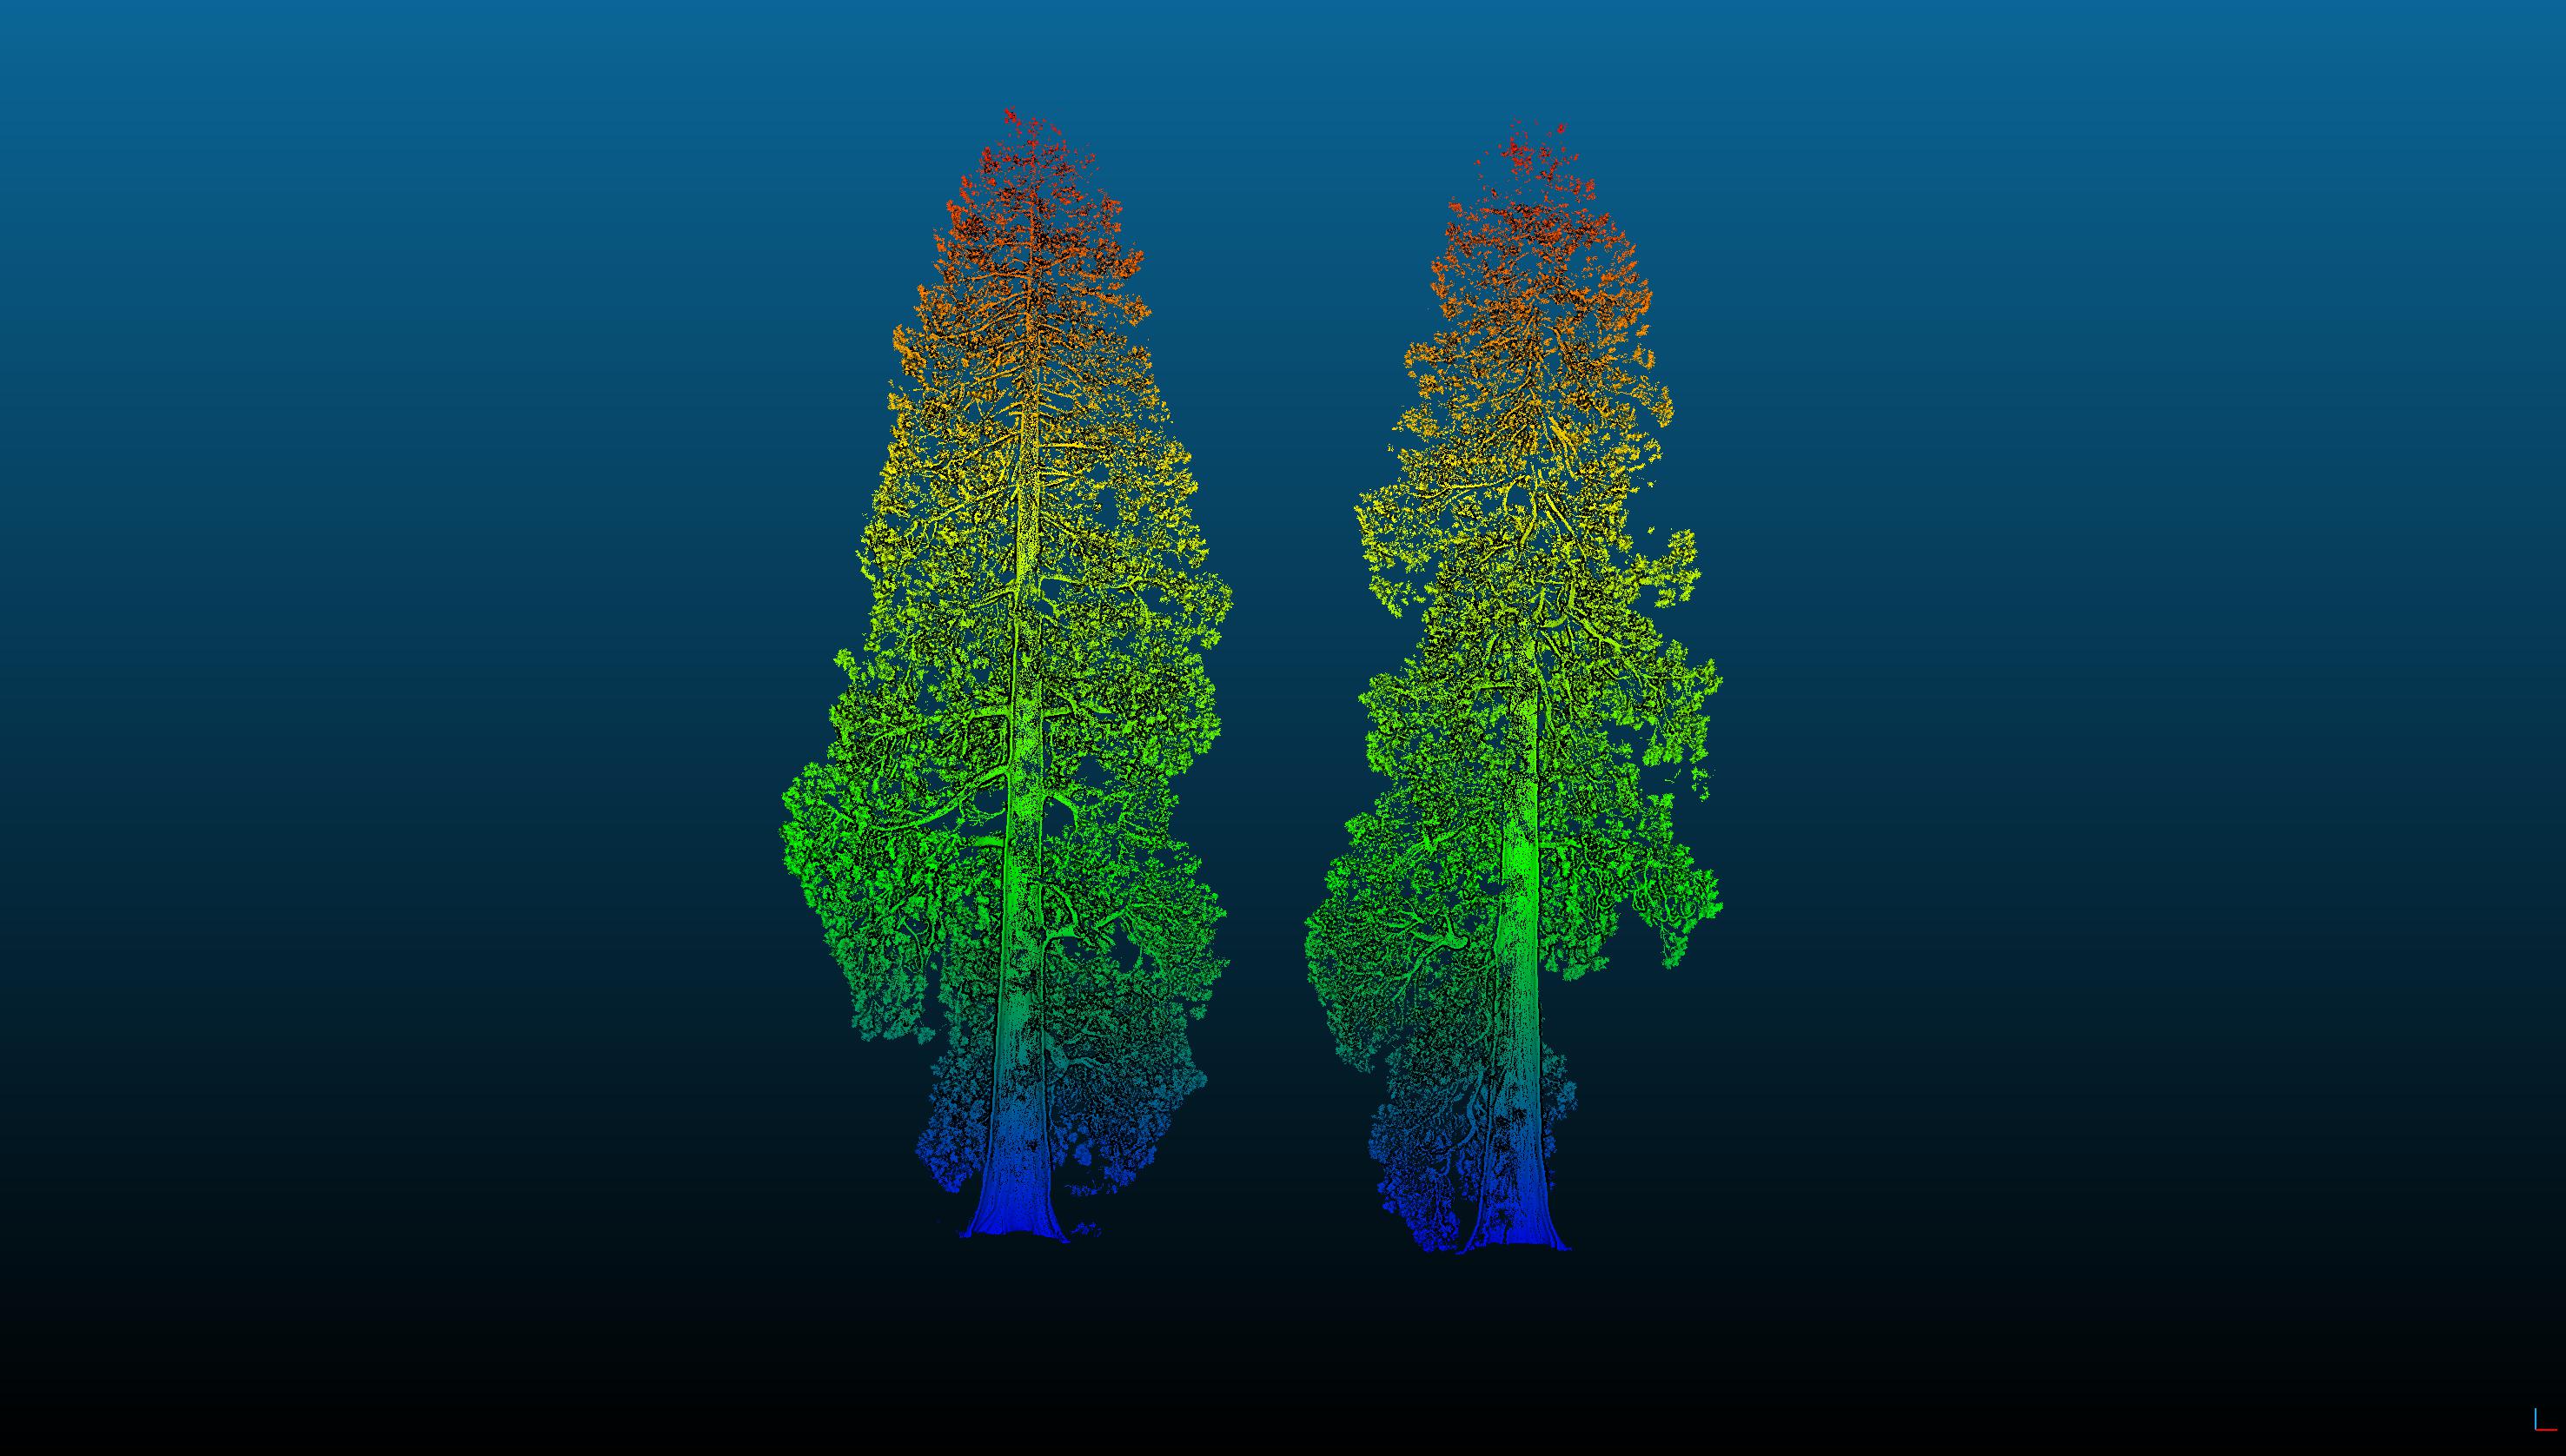 A 3D laser scan of two giant sequoias (Mathilda Digby/PA).